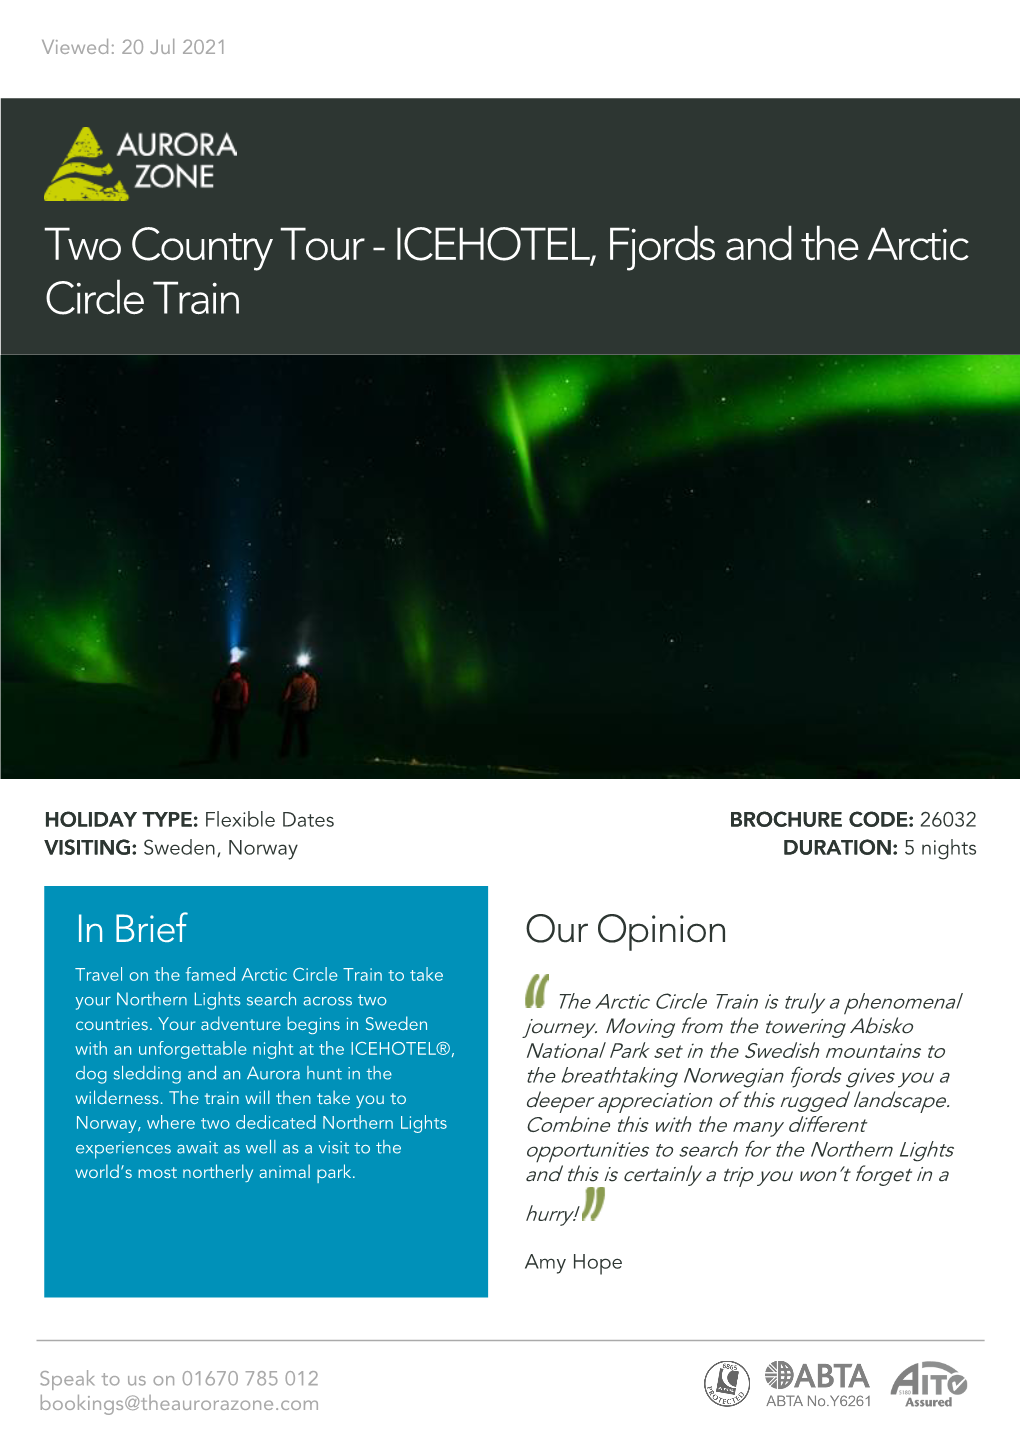 ICEHOTEL, Fjords and the Arctic Circle Train